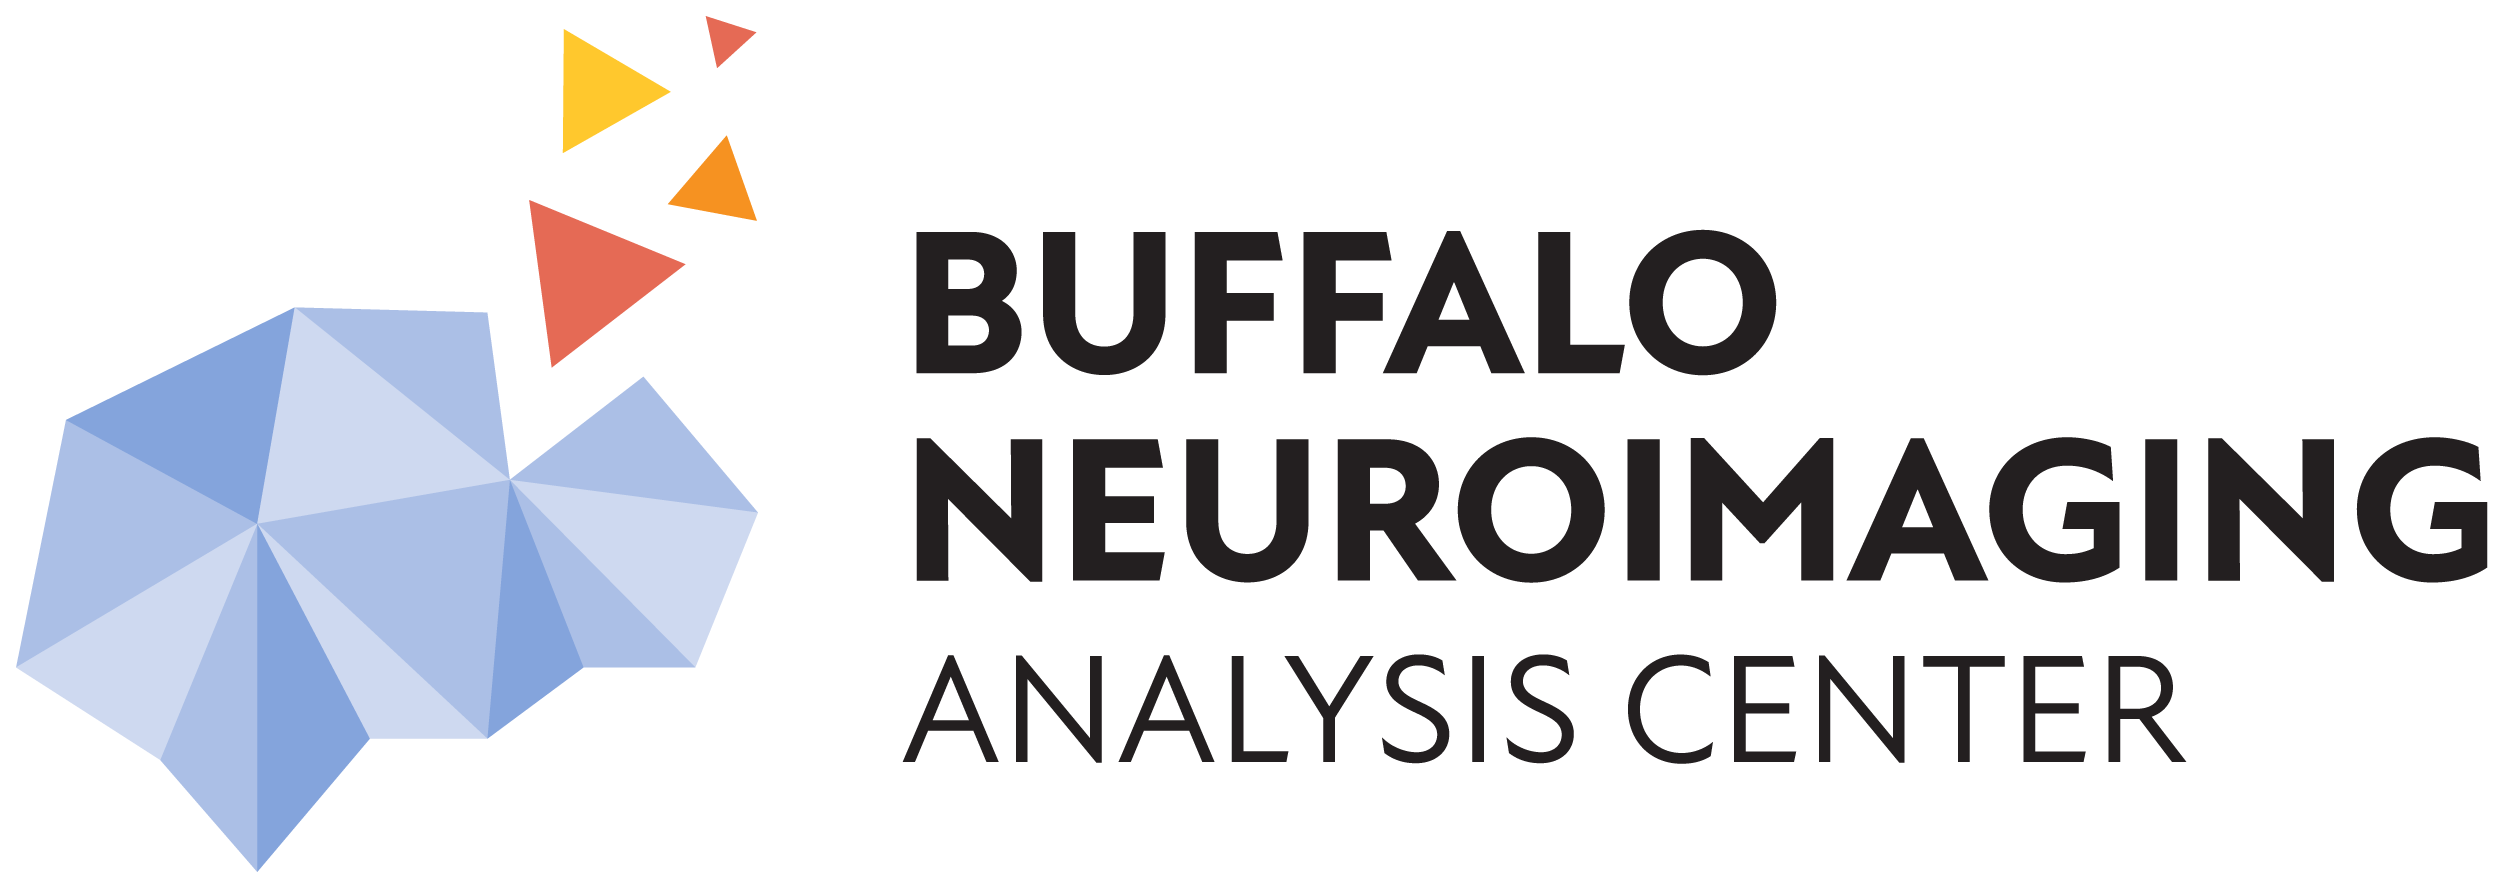 Dejan Jakimovski, MD, PhD, presents first research to use the sNfL biomarker to affirm the link between brain blood flow and neuronal damage associated with MS Image